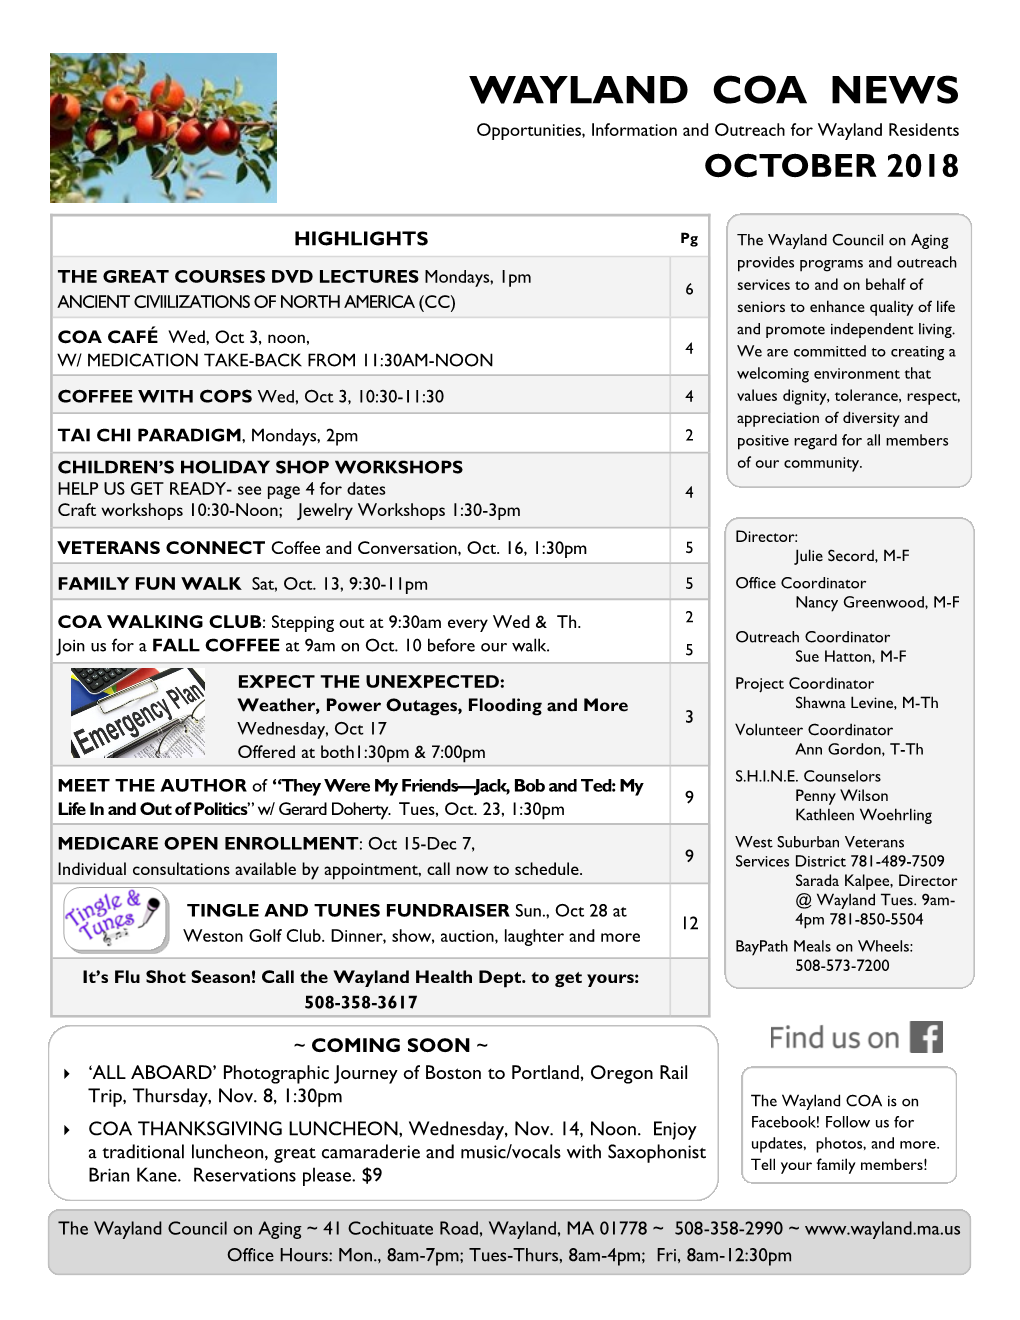 WAYLAND COA NEWS Opportunities, Information and Outreach for Wayland Residents OCTOBER 2018